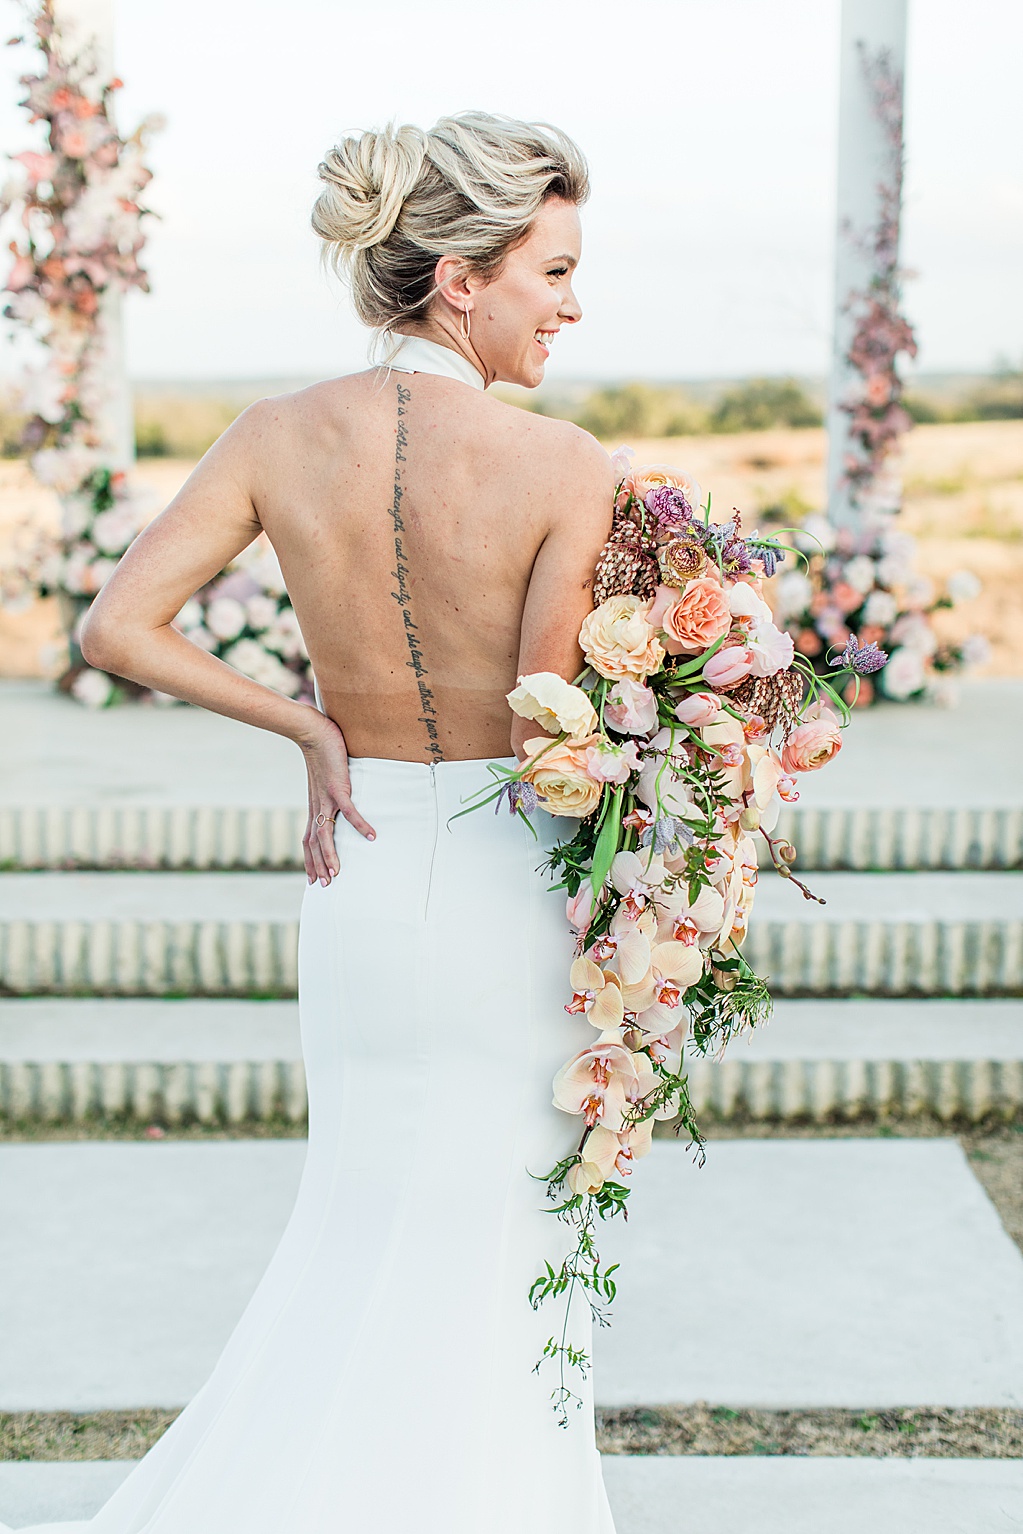 Blush mauve peach and coral wedding inspiration at Prospect House in Dripping Springs Texas wedding venue by Allison Jeffers Photography 0044